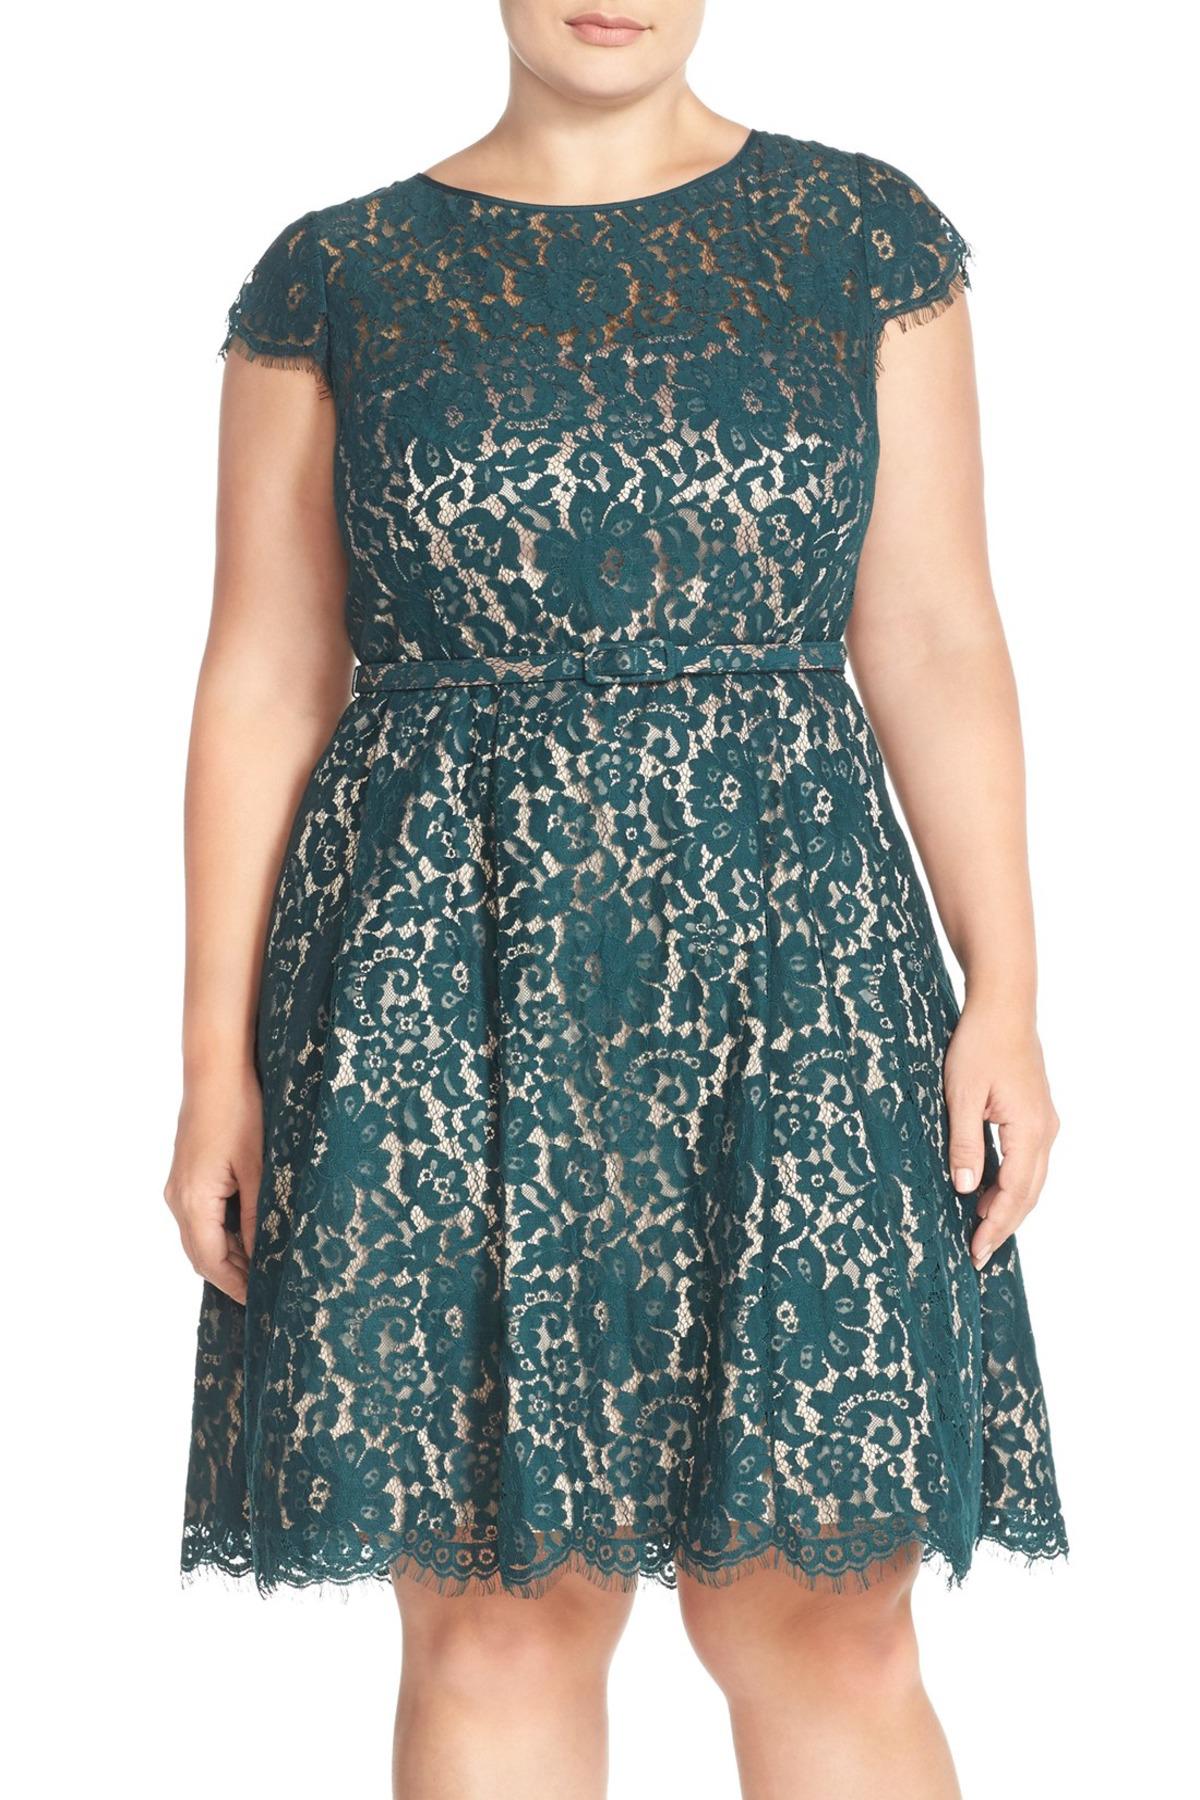 Lyst - Eliza J Cap Sleeve Lace Fit & Flare Party Dress in Green